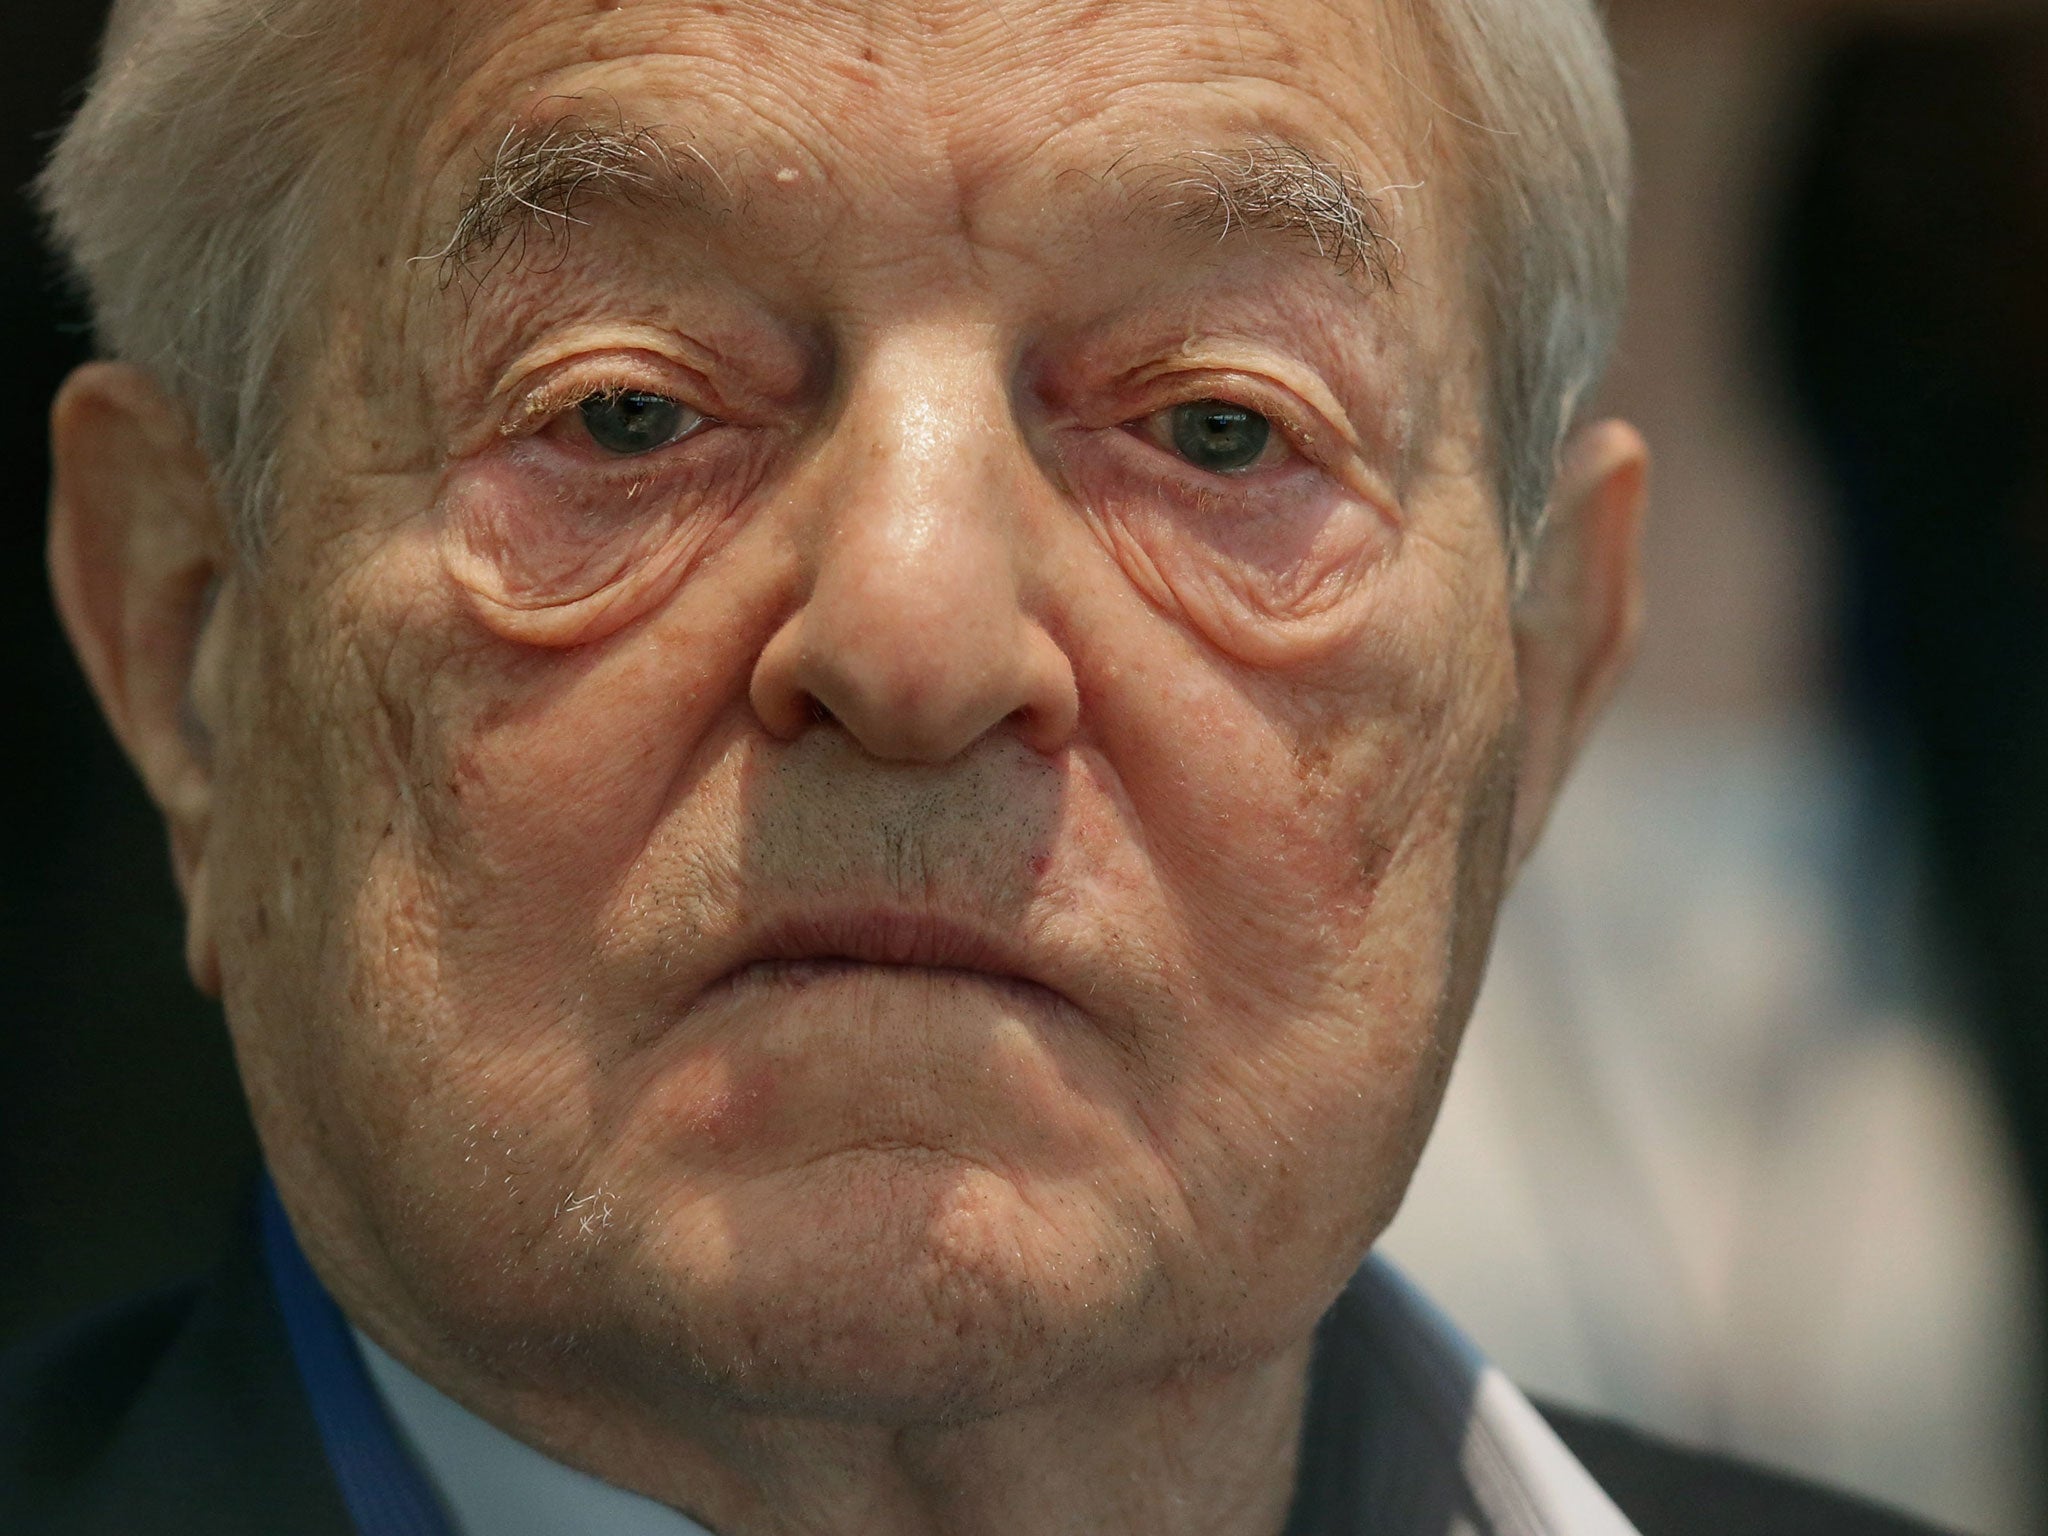 George Soros is one of the 30 richest people in the world